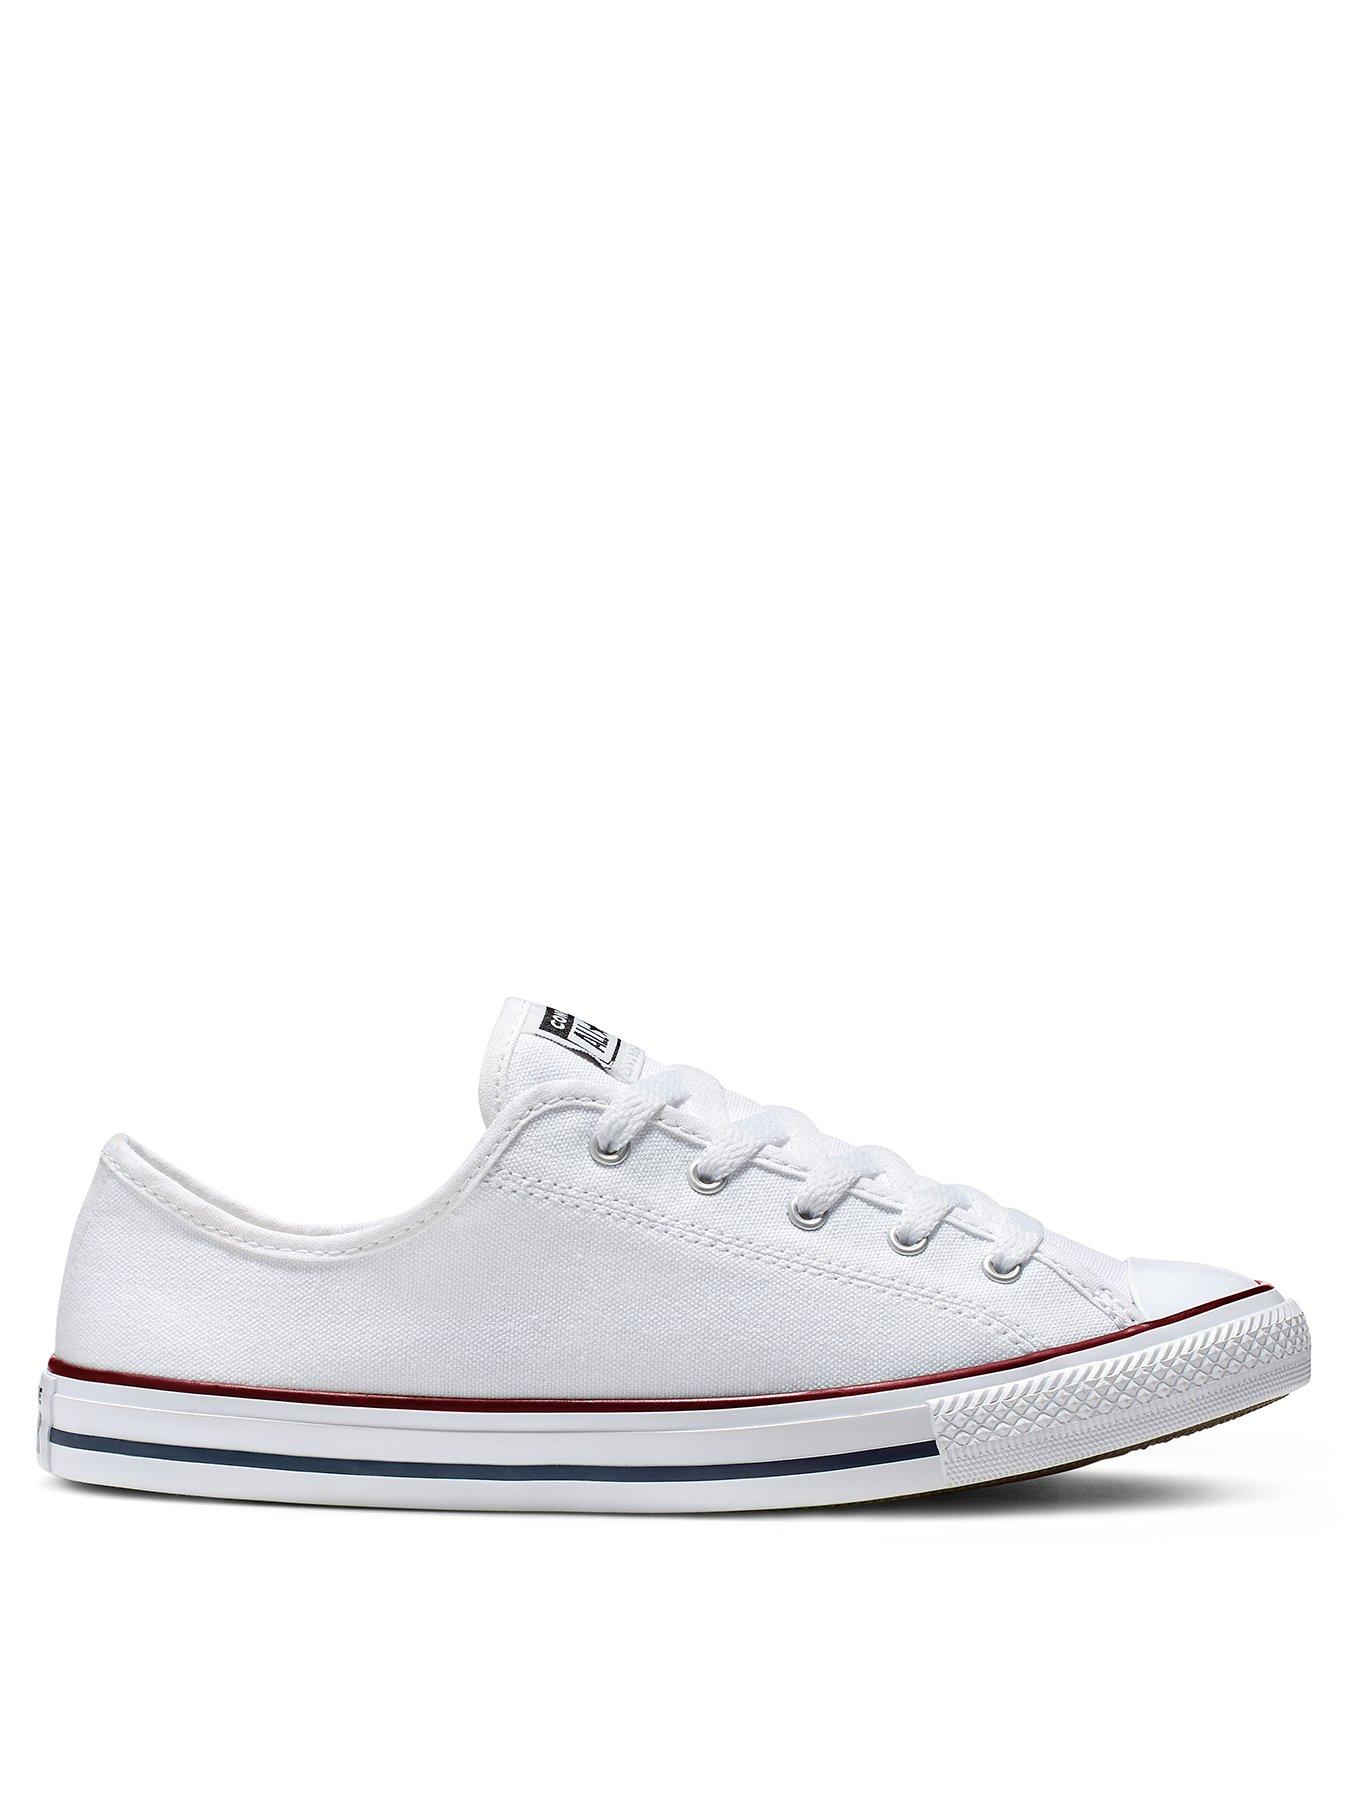 converse chuck taylor ox dainty womens casual shoes